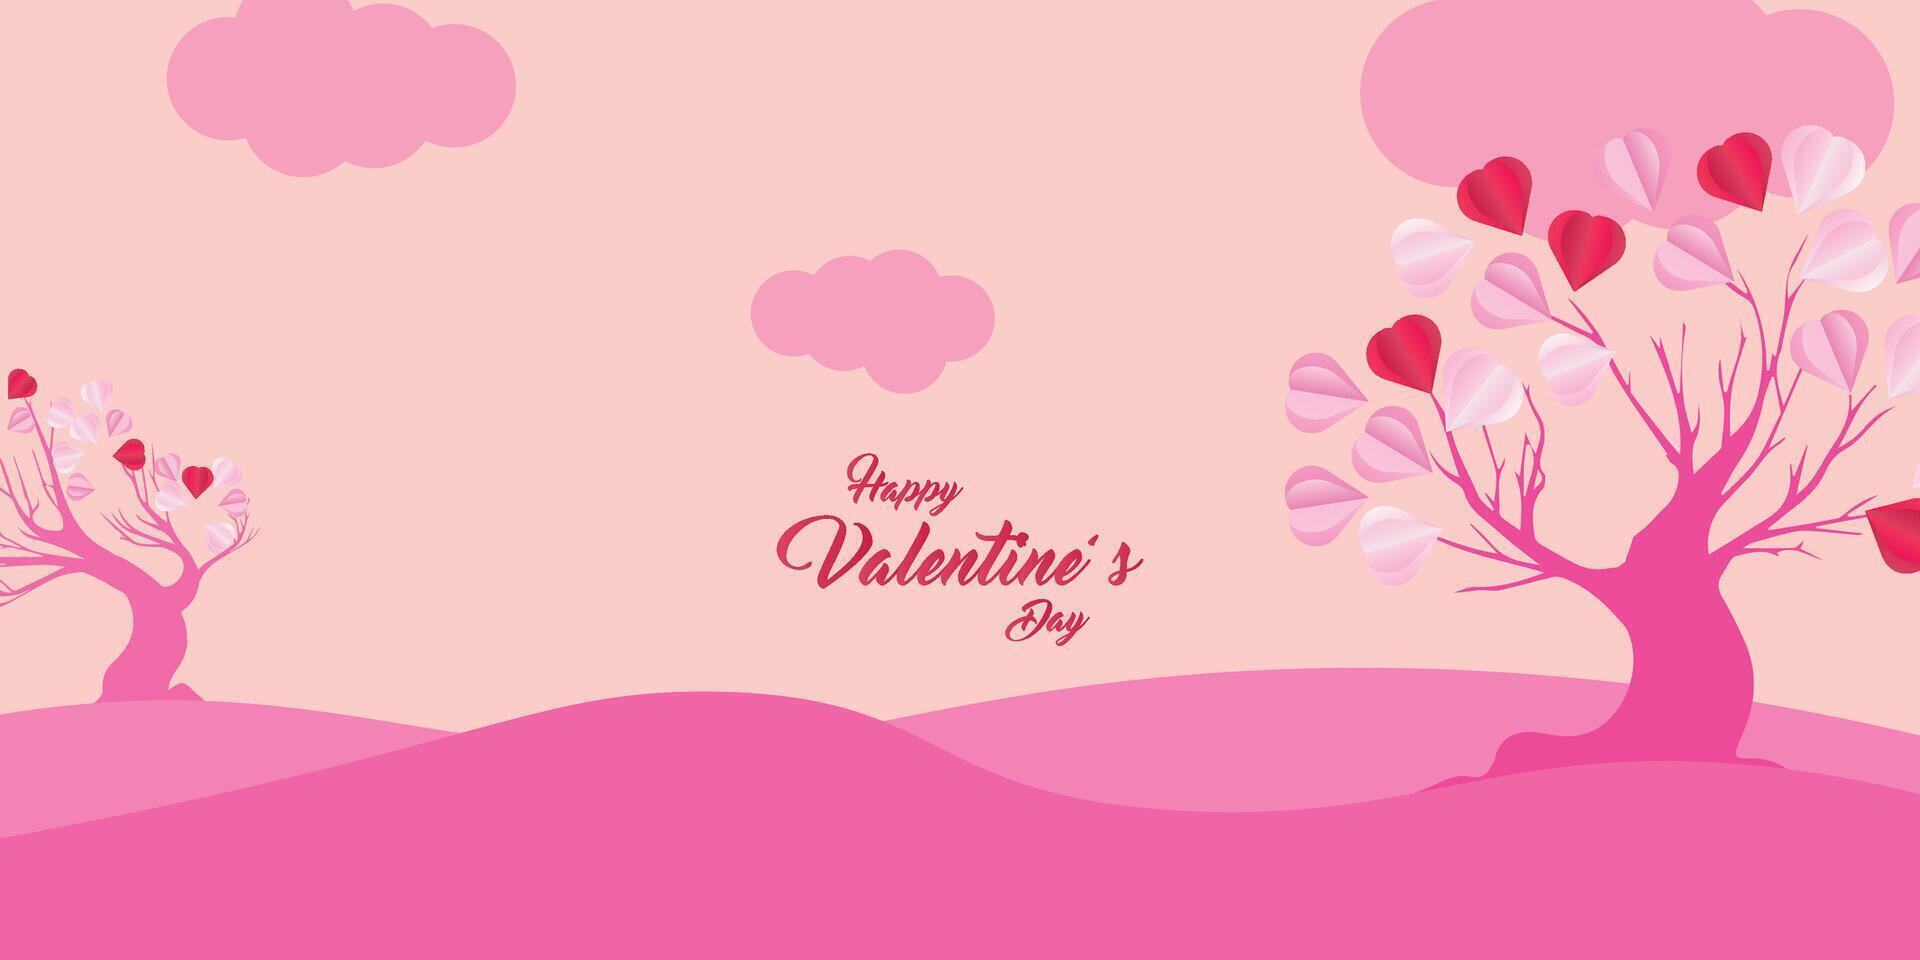 Valentine's day concept love illustration of tree with heart shaped leaves growing in paper cut style vector